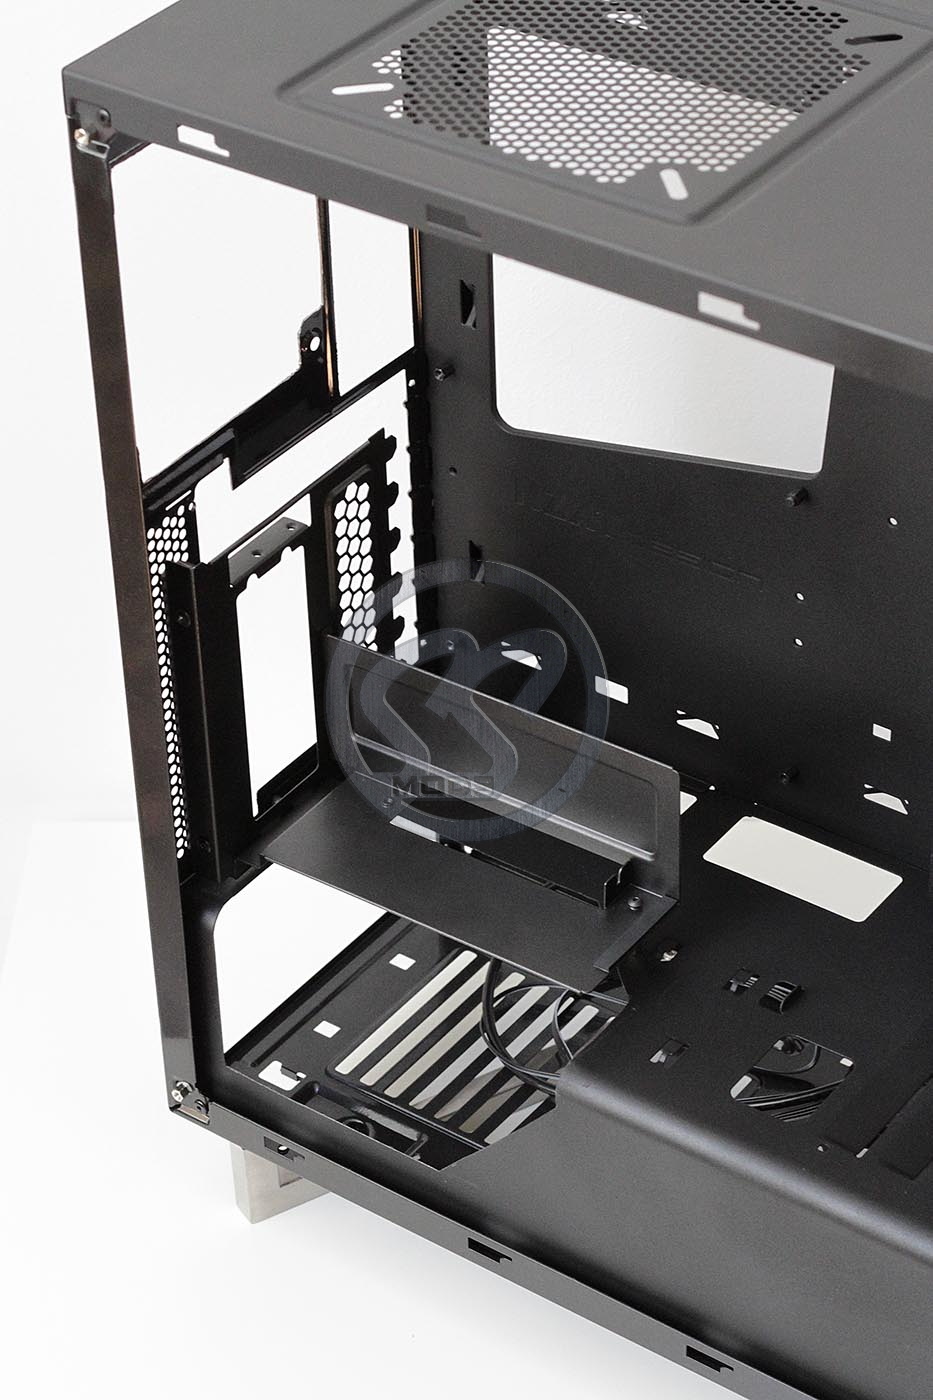 NZXT-by-SS-59